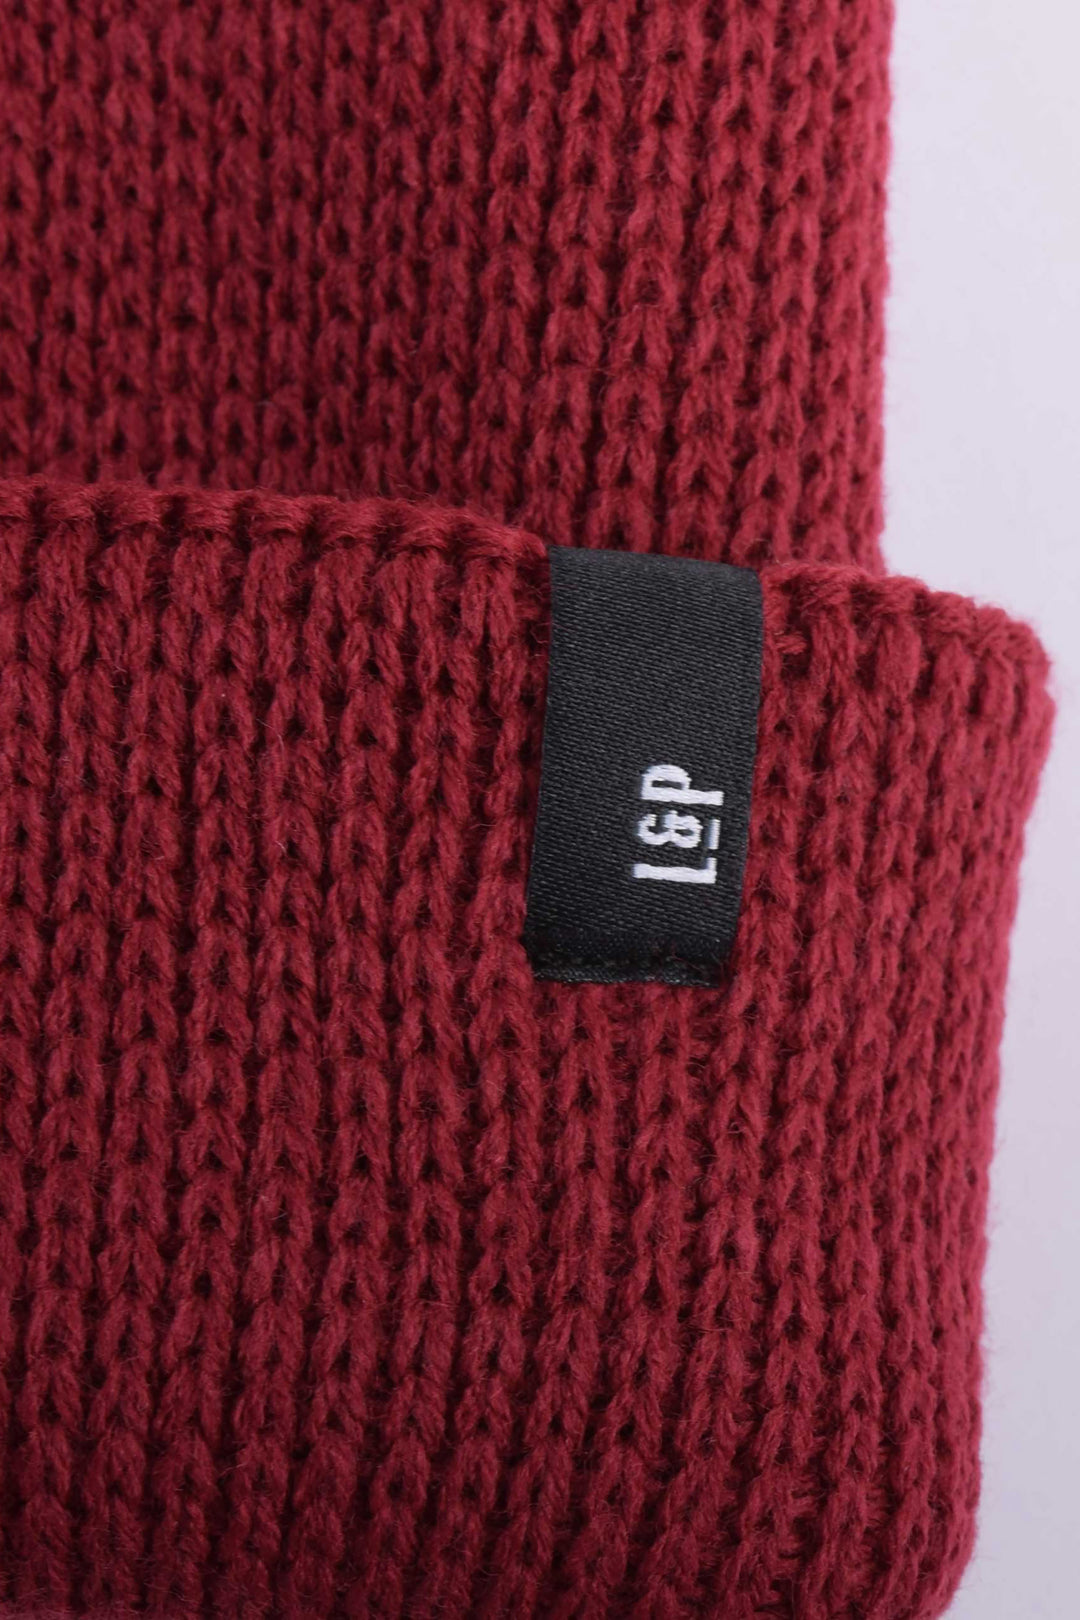 2-in-1 knit toque [New York series] [Baby]